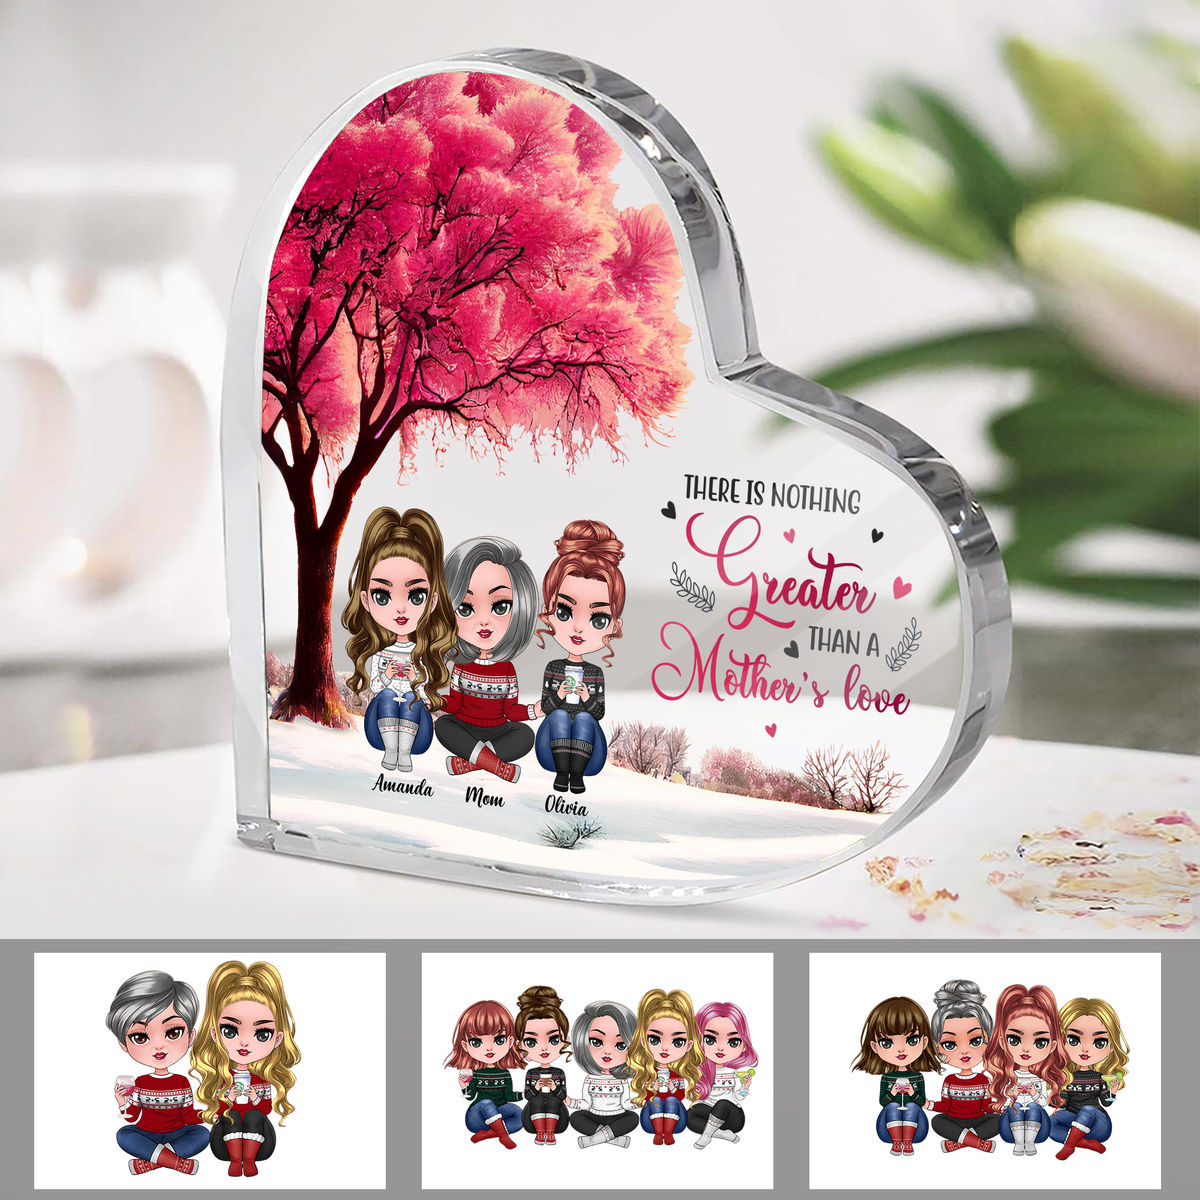 Personalized Desktop - Transparent Plaque - Mother and daughter - There is nothing greater than a mother’s love (Custom Heart-Shaped Acrylic Plaque)_2